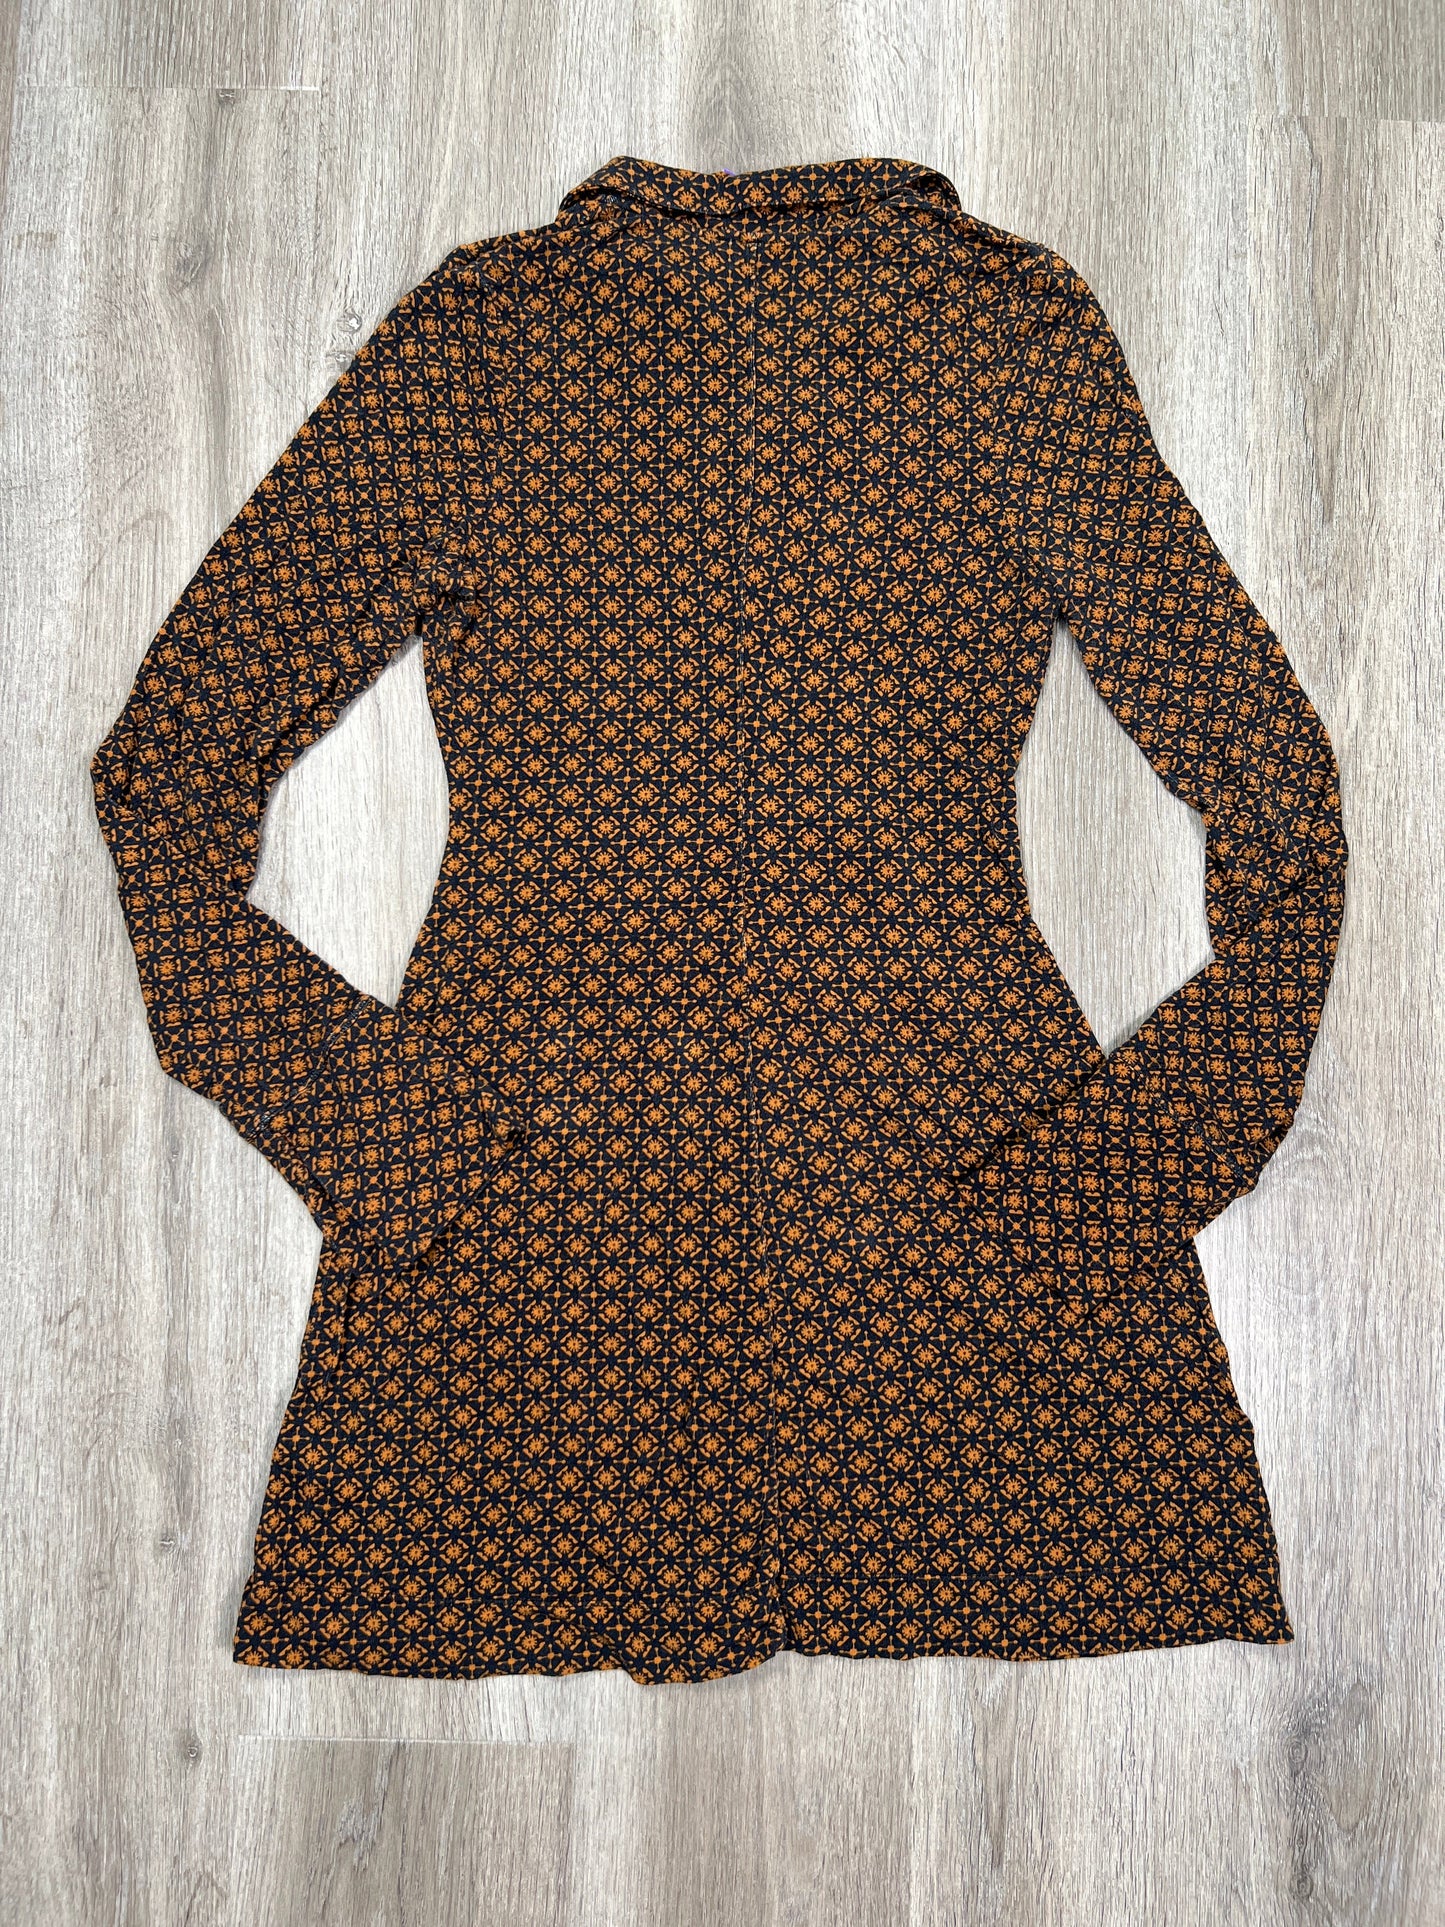 Black & Brown Dress Casual Short Free People, Size M